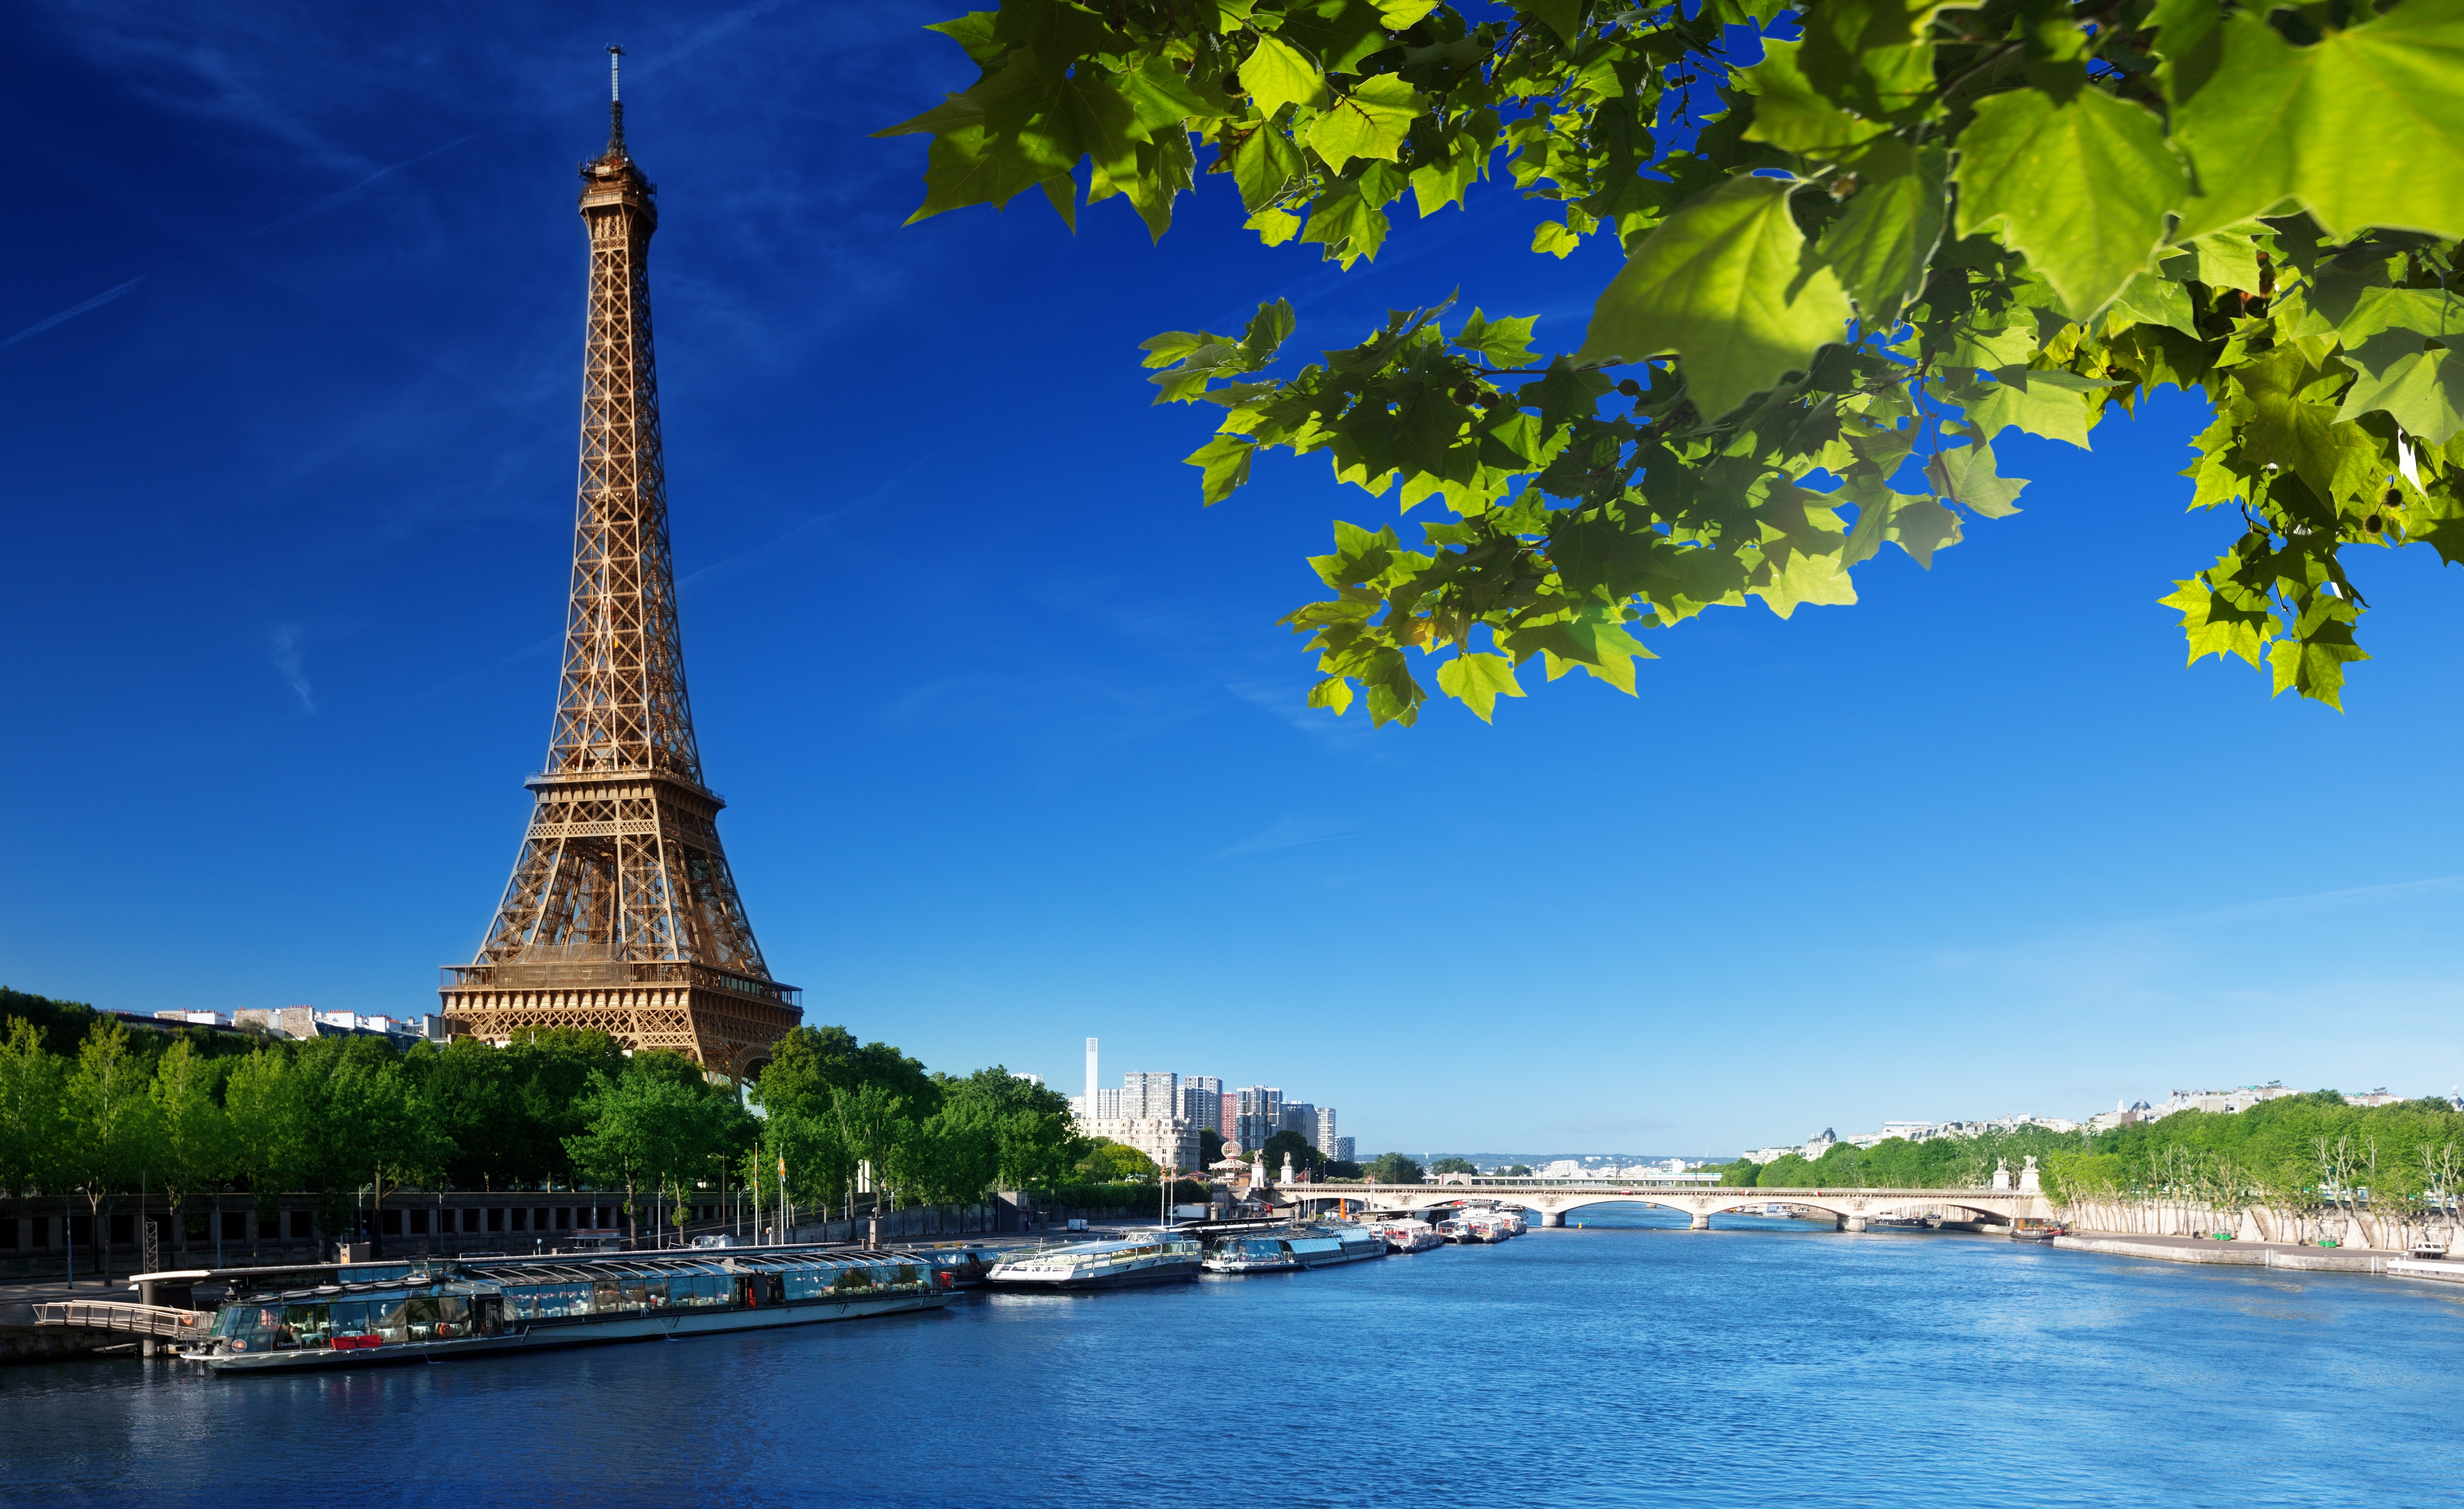 4K Eiffel Tower Wallpapers High Quality | Download Free